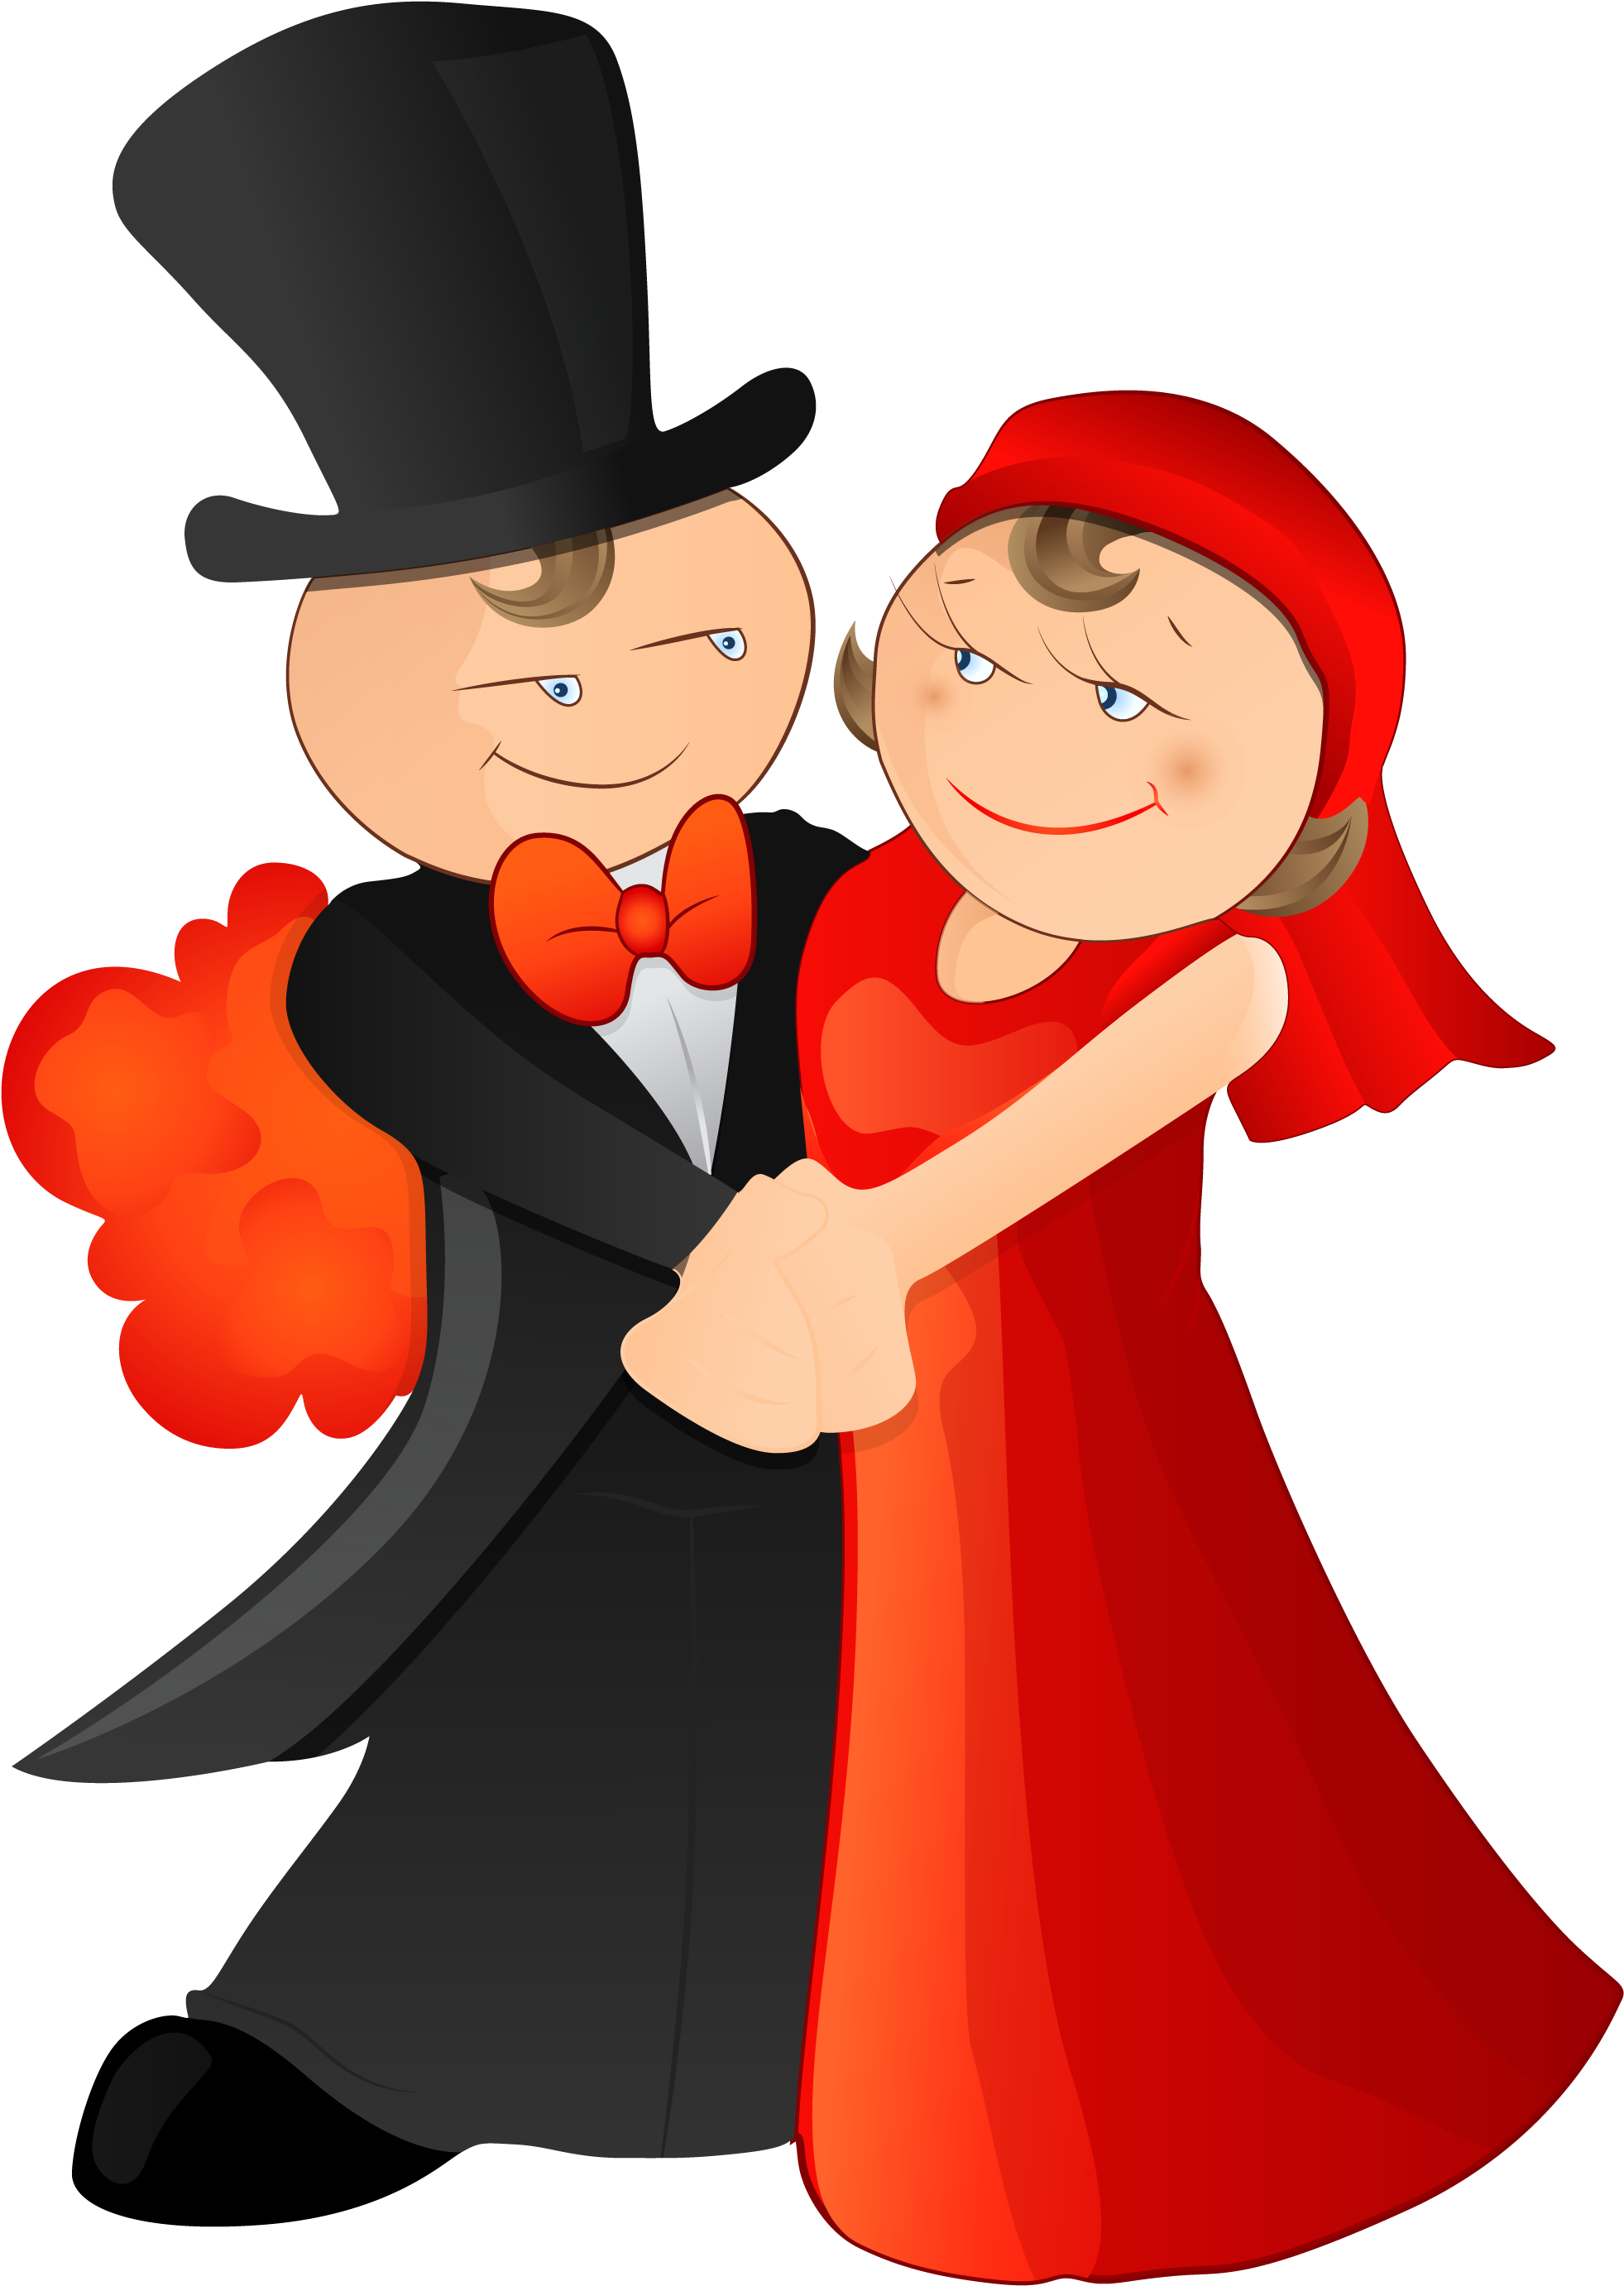 Download Cartoon Marriage Illustration The Bride And Dancing - Cartoon Bride  And Groom Dancing PNG Image with No Background 